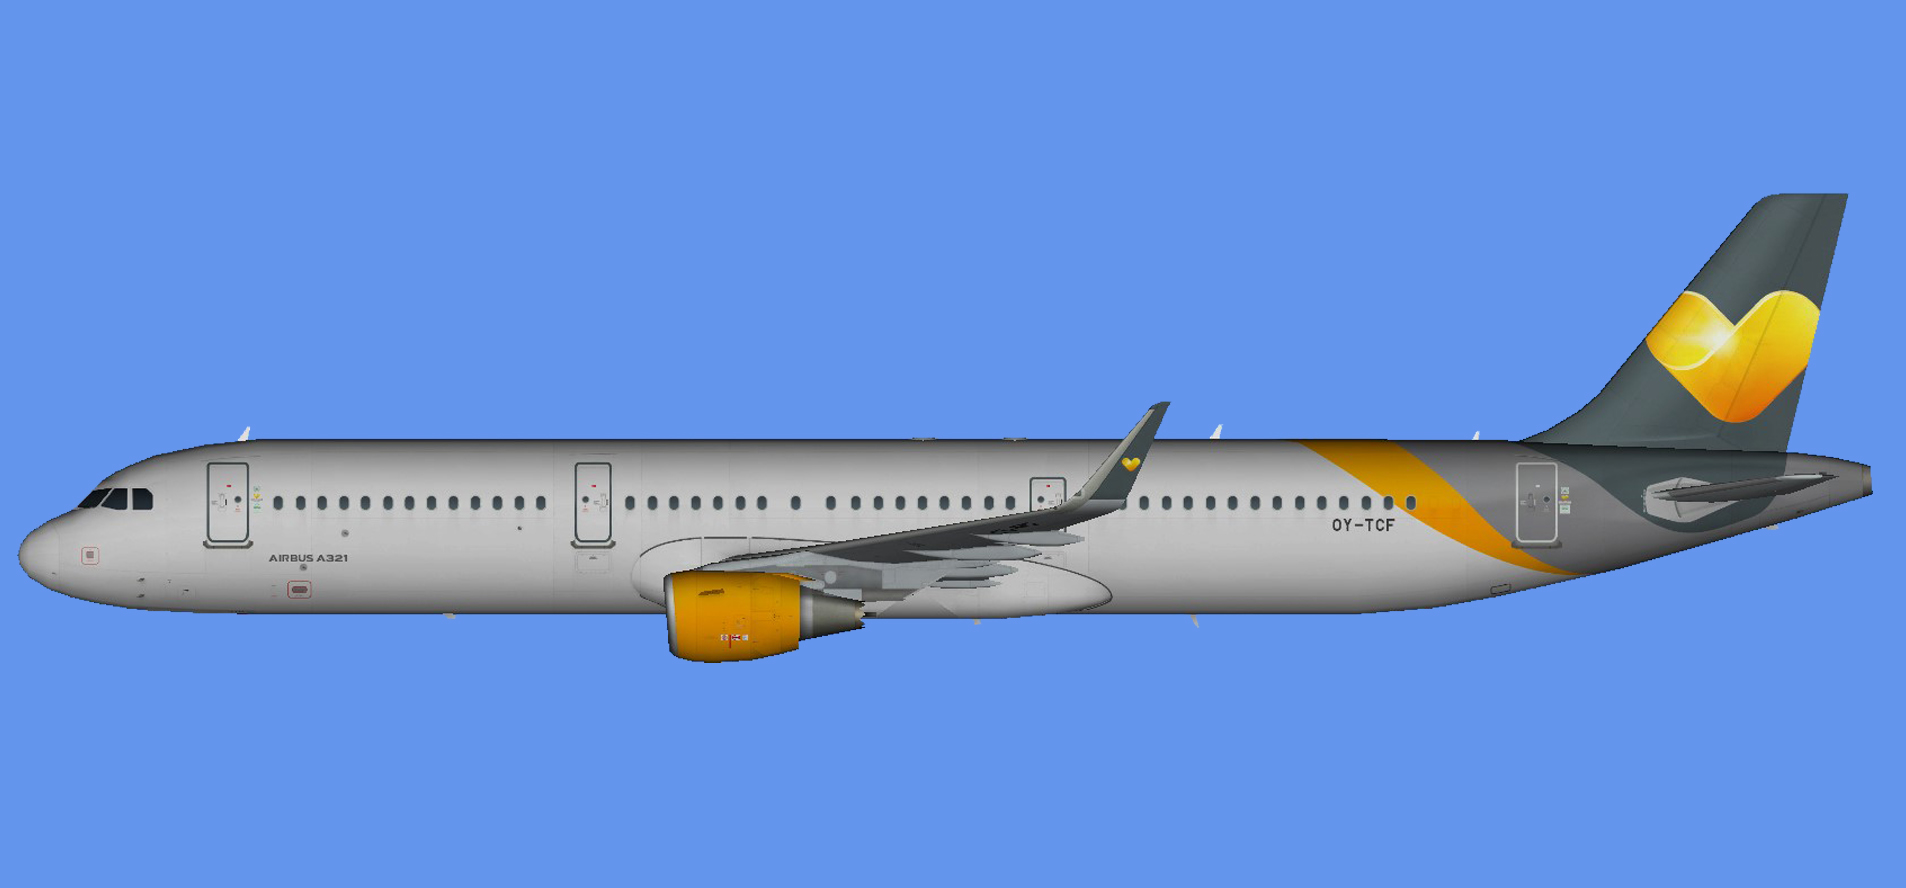 Sunclass Airlines Airbus A321 (sharklets)